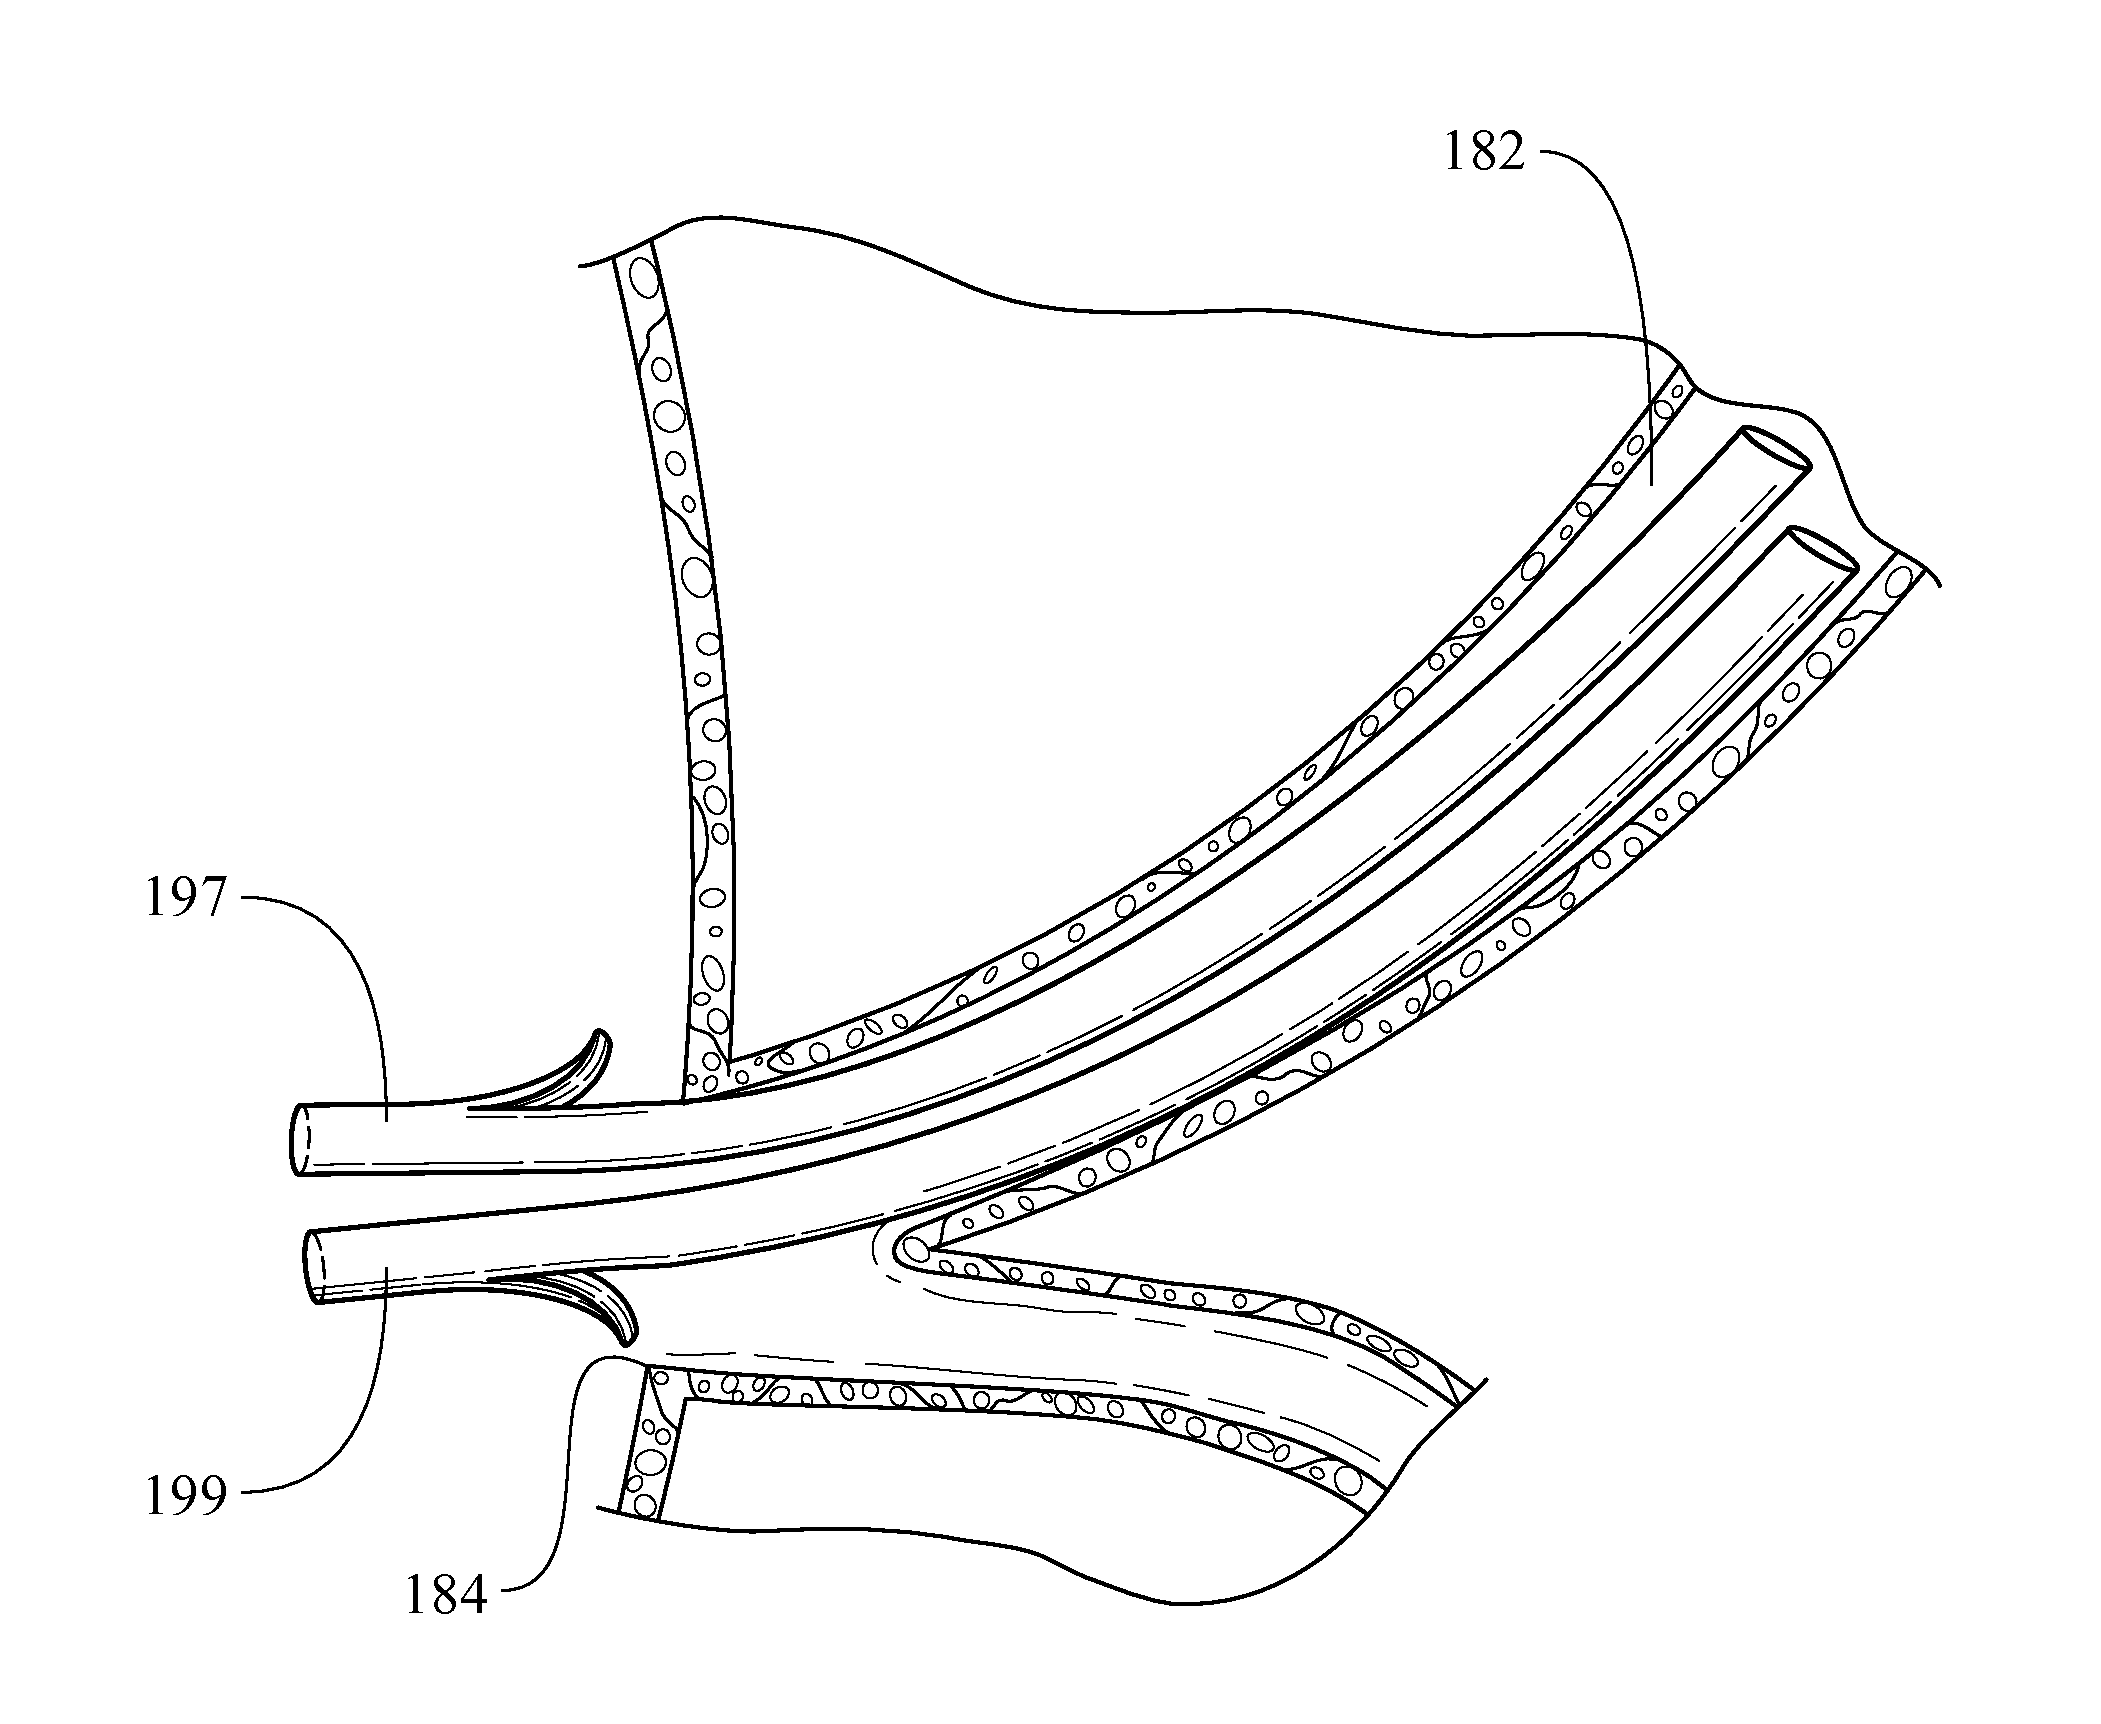 Method of placing multiple biliary stents without re-intervention, and device for same